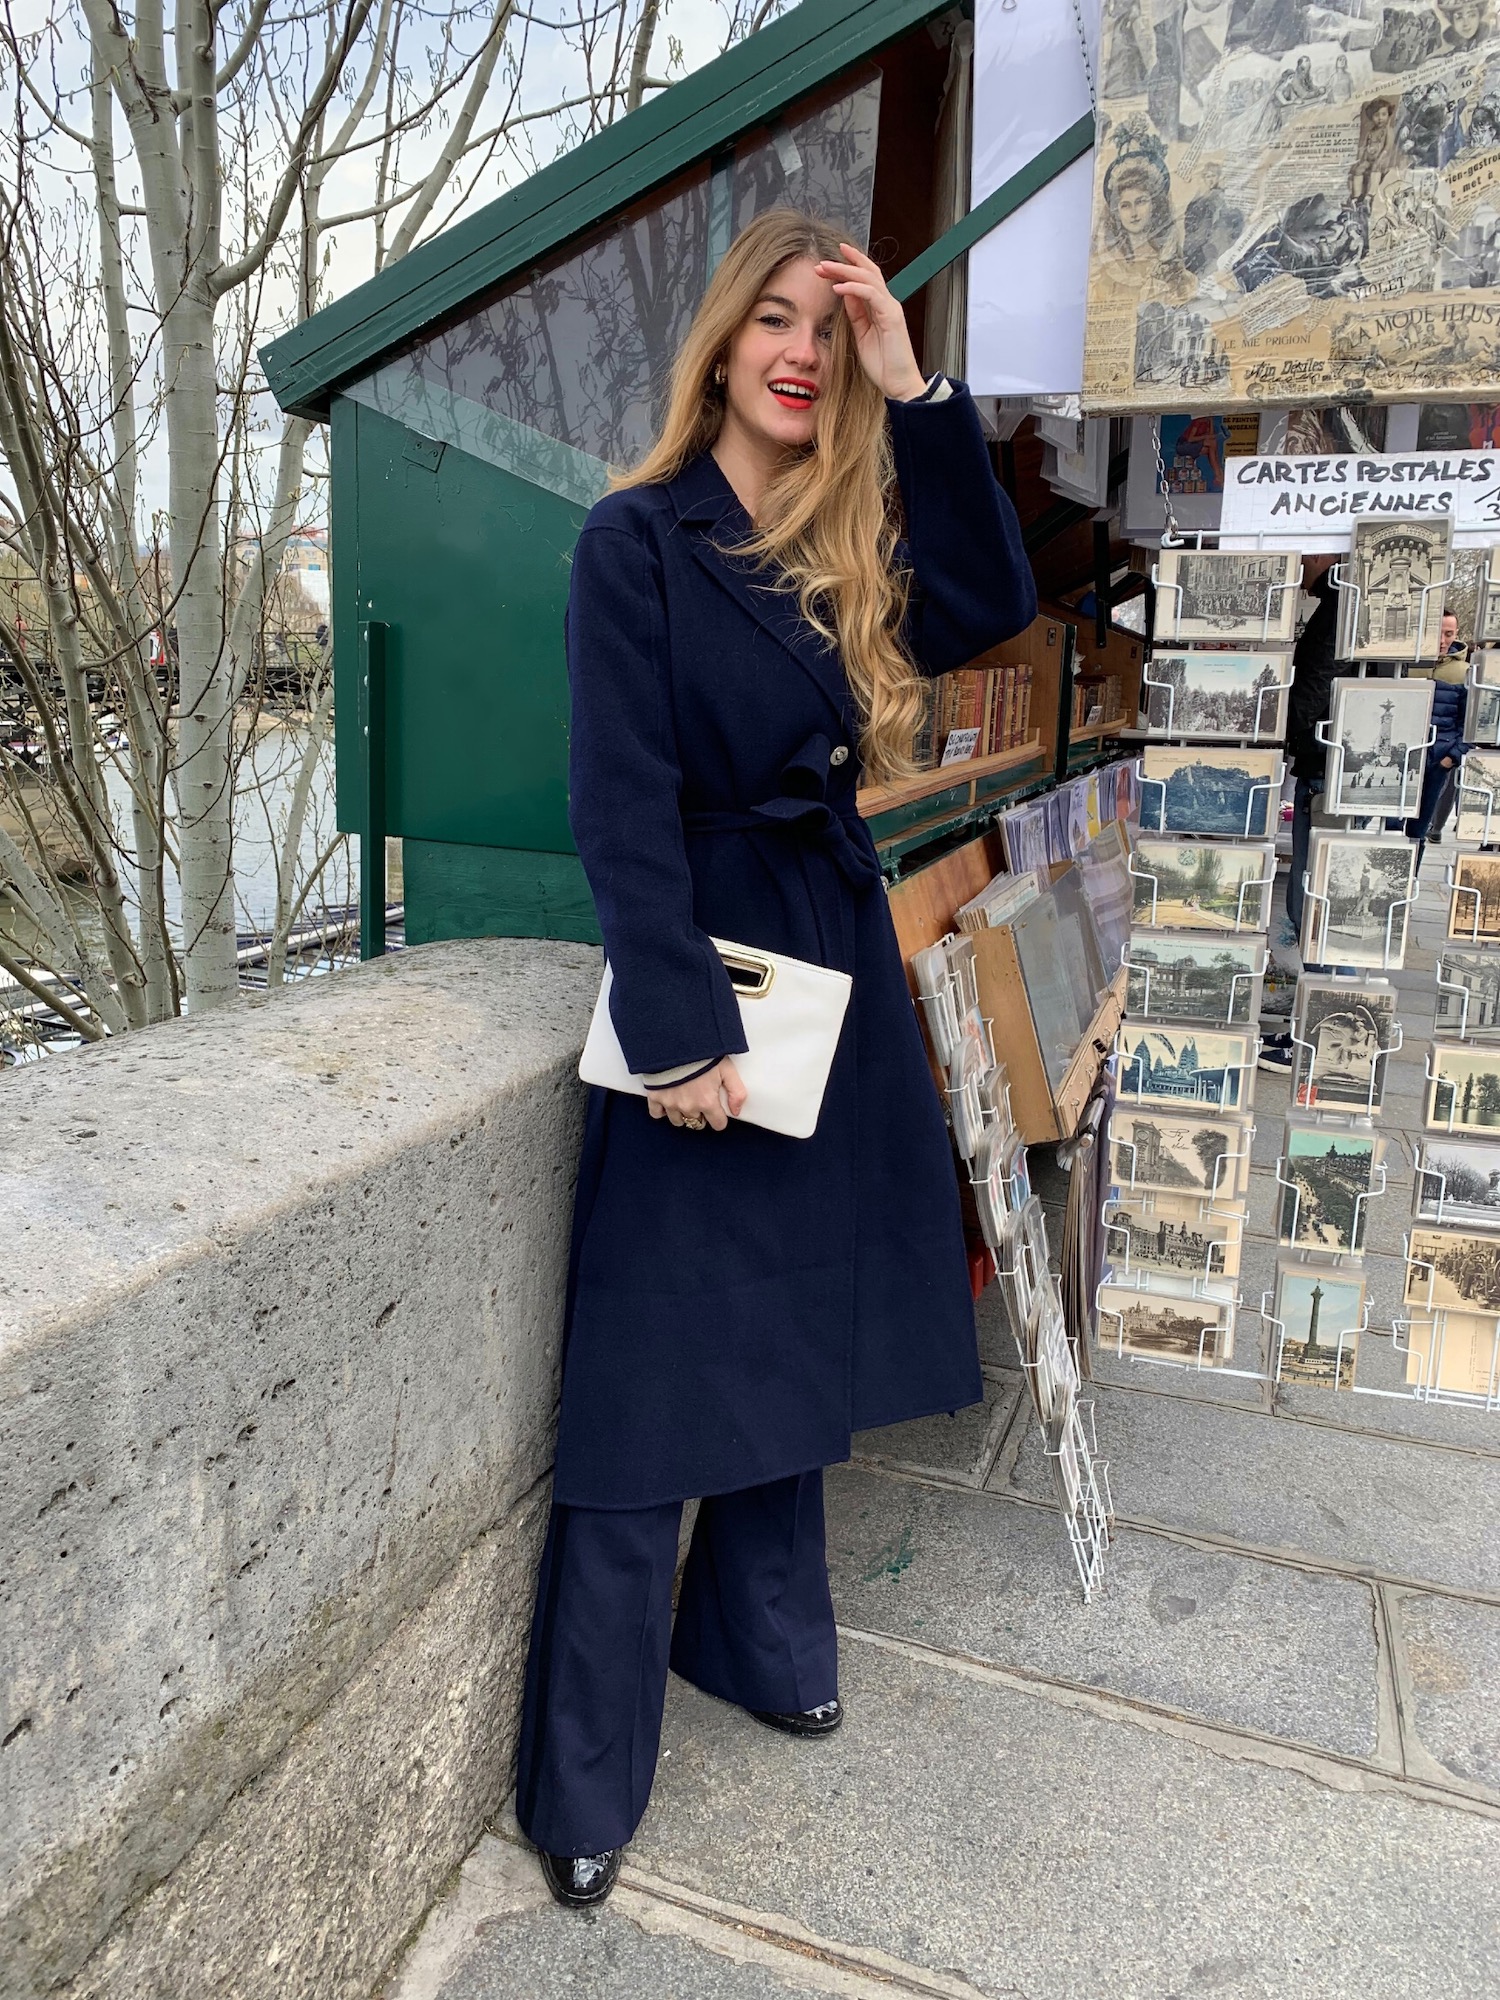 Constance Arnoult wearing a navy wool coat near the bouquinistes of Paris